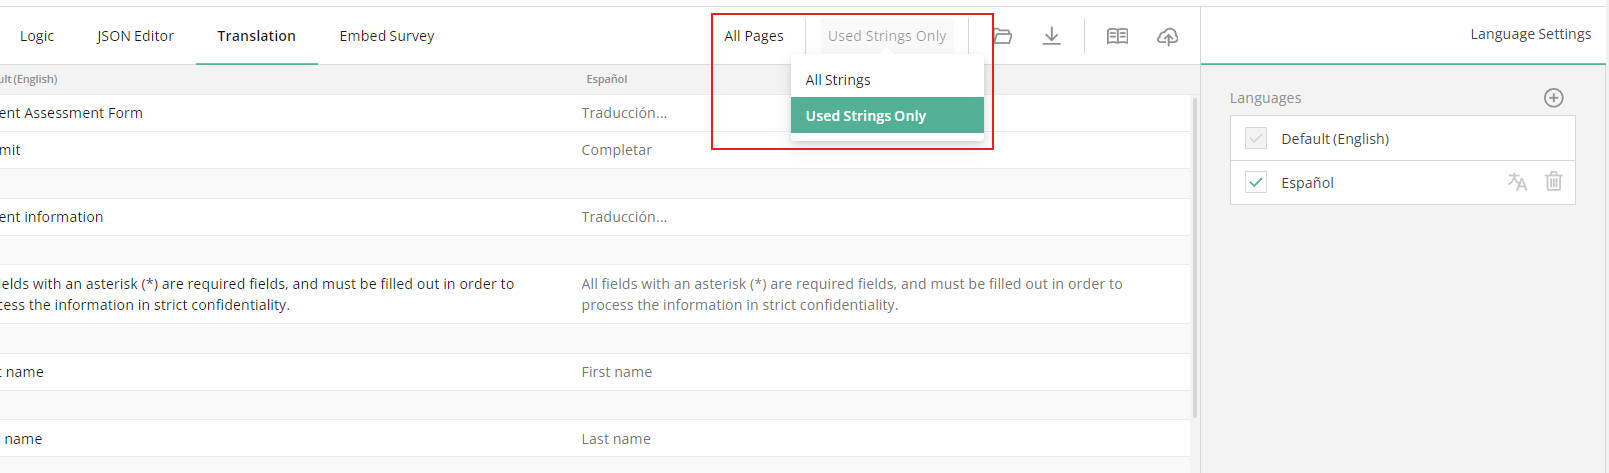 Translation tab: Applying filters to sift out strings to review and modify